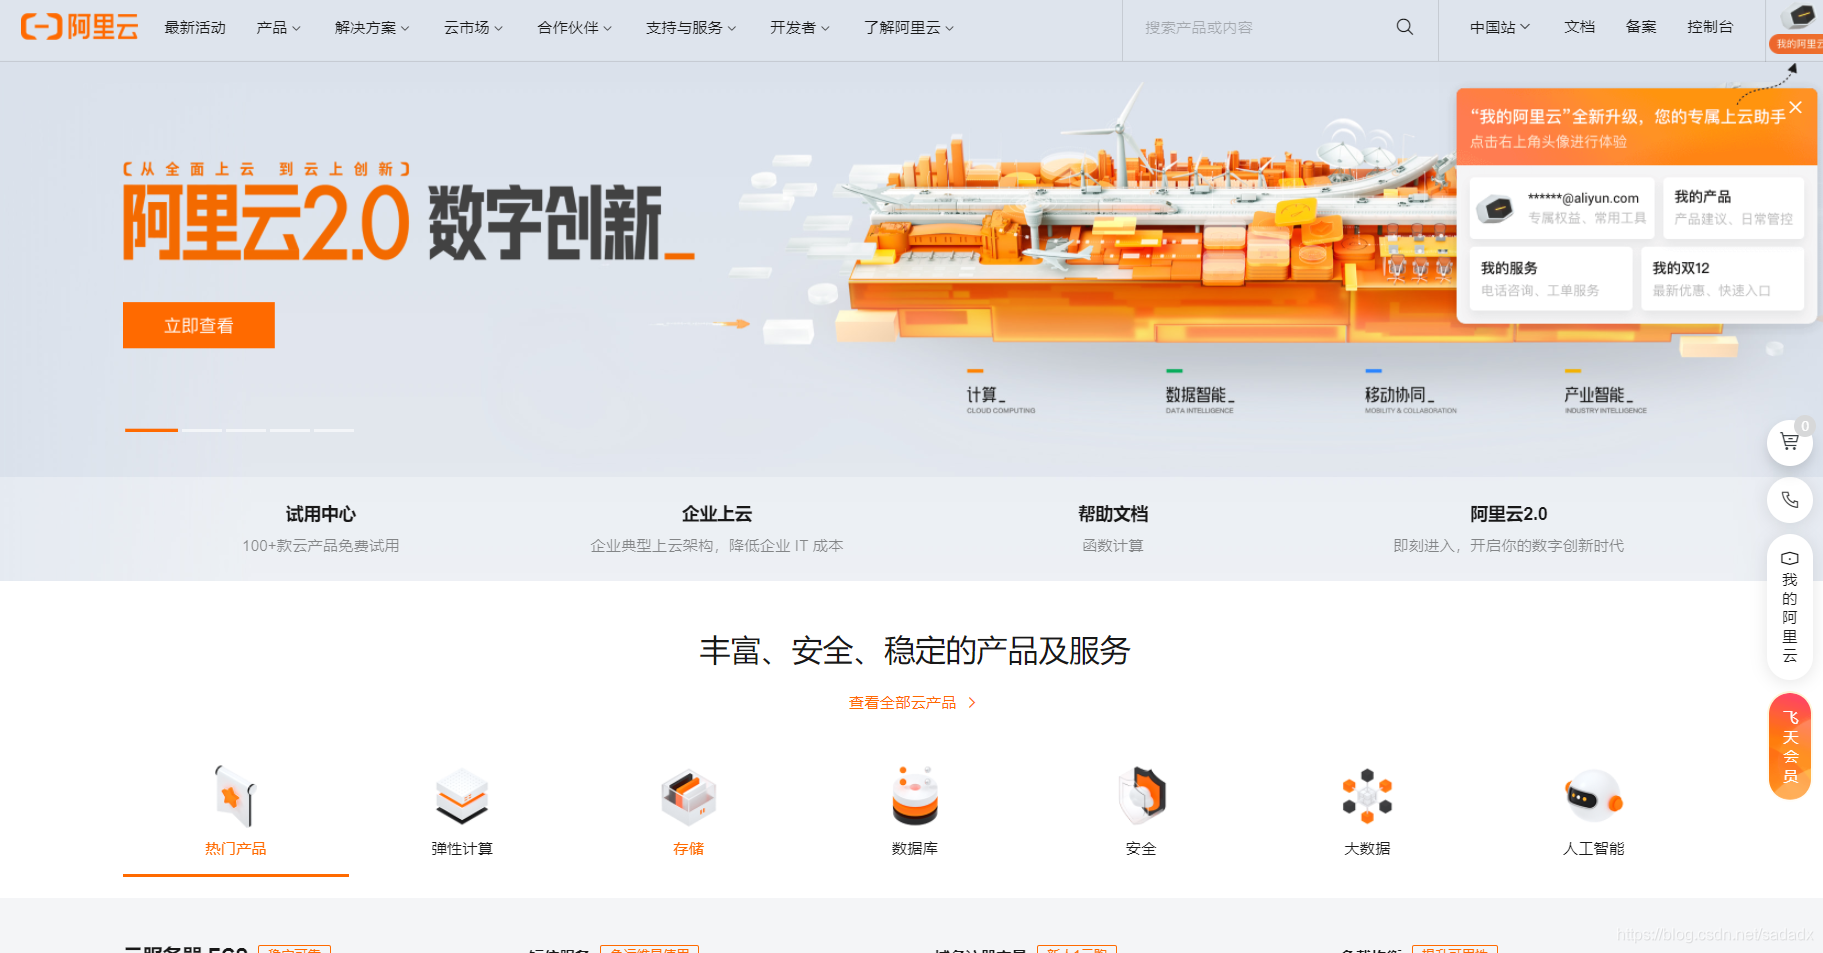 Log in to Alibaba Cloud official website